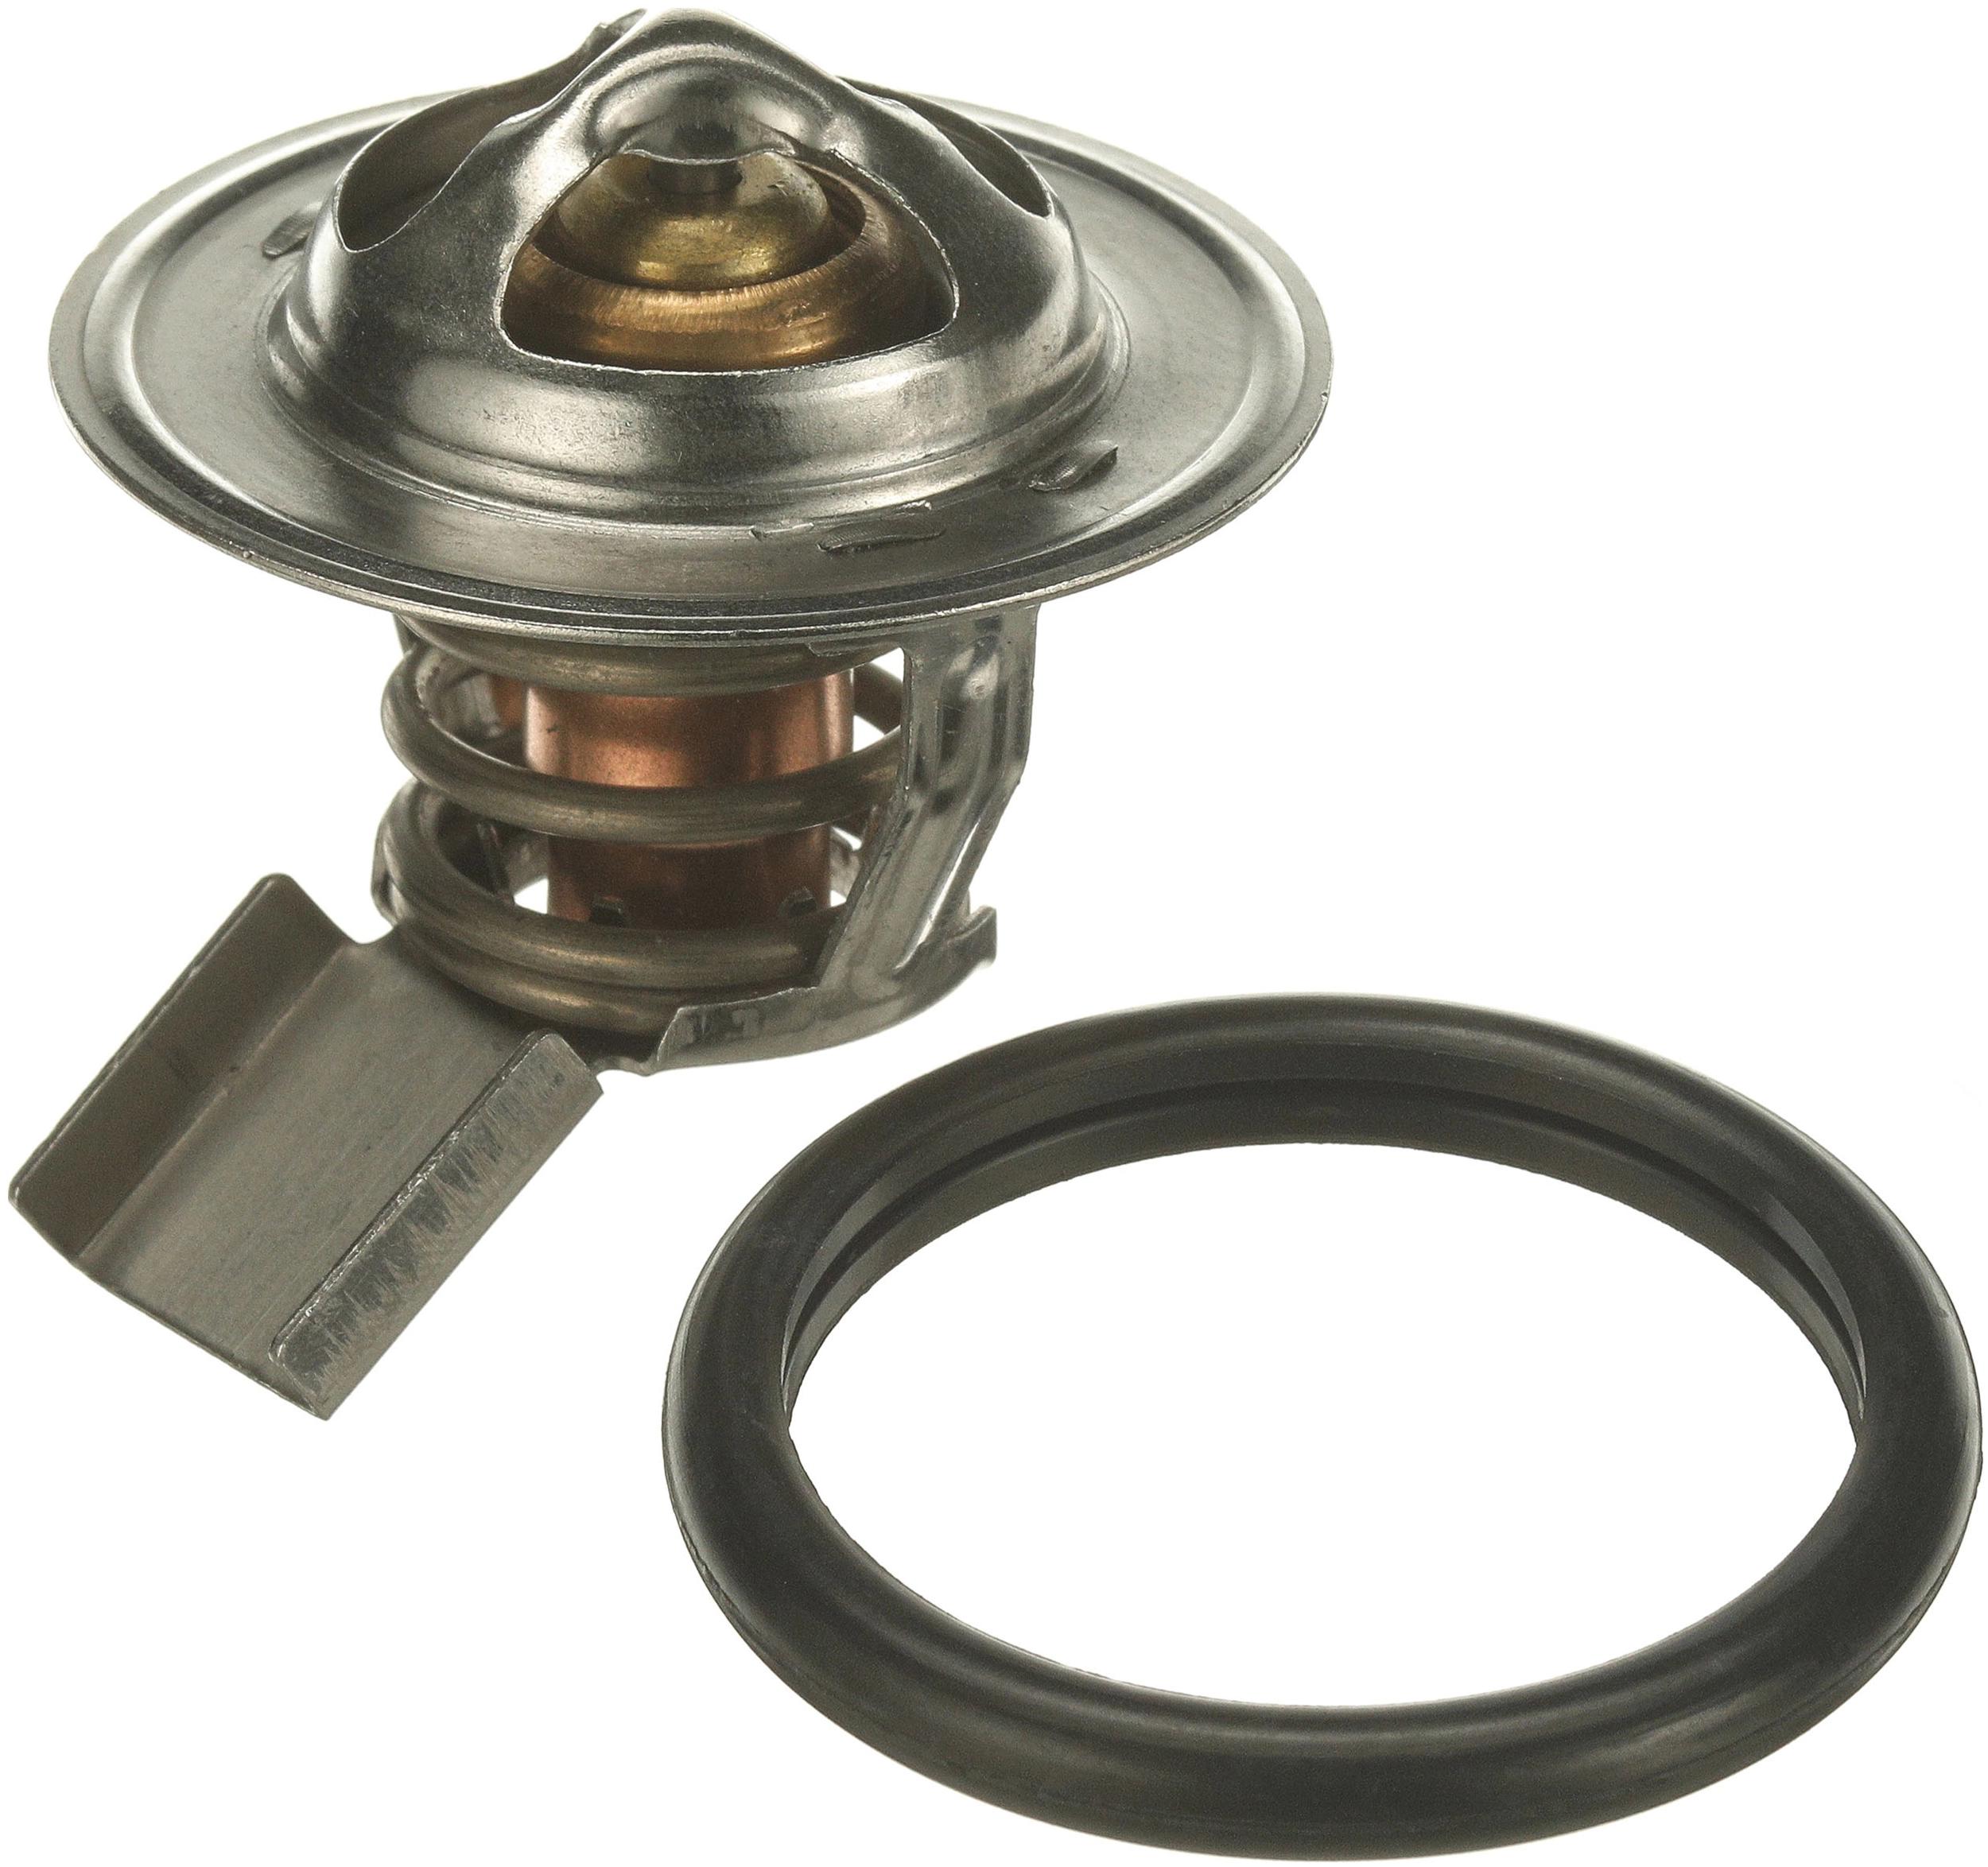 Gates 33913 OE Type Thermostats, 33913 THERMOSTAT 2.76 false false false 0 0 O-Ring 1 Stainless Steel, Copper 1 0.35